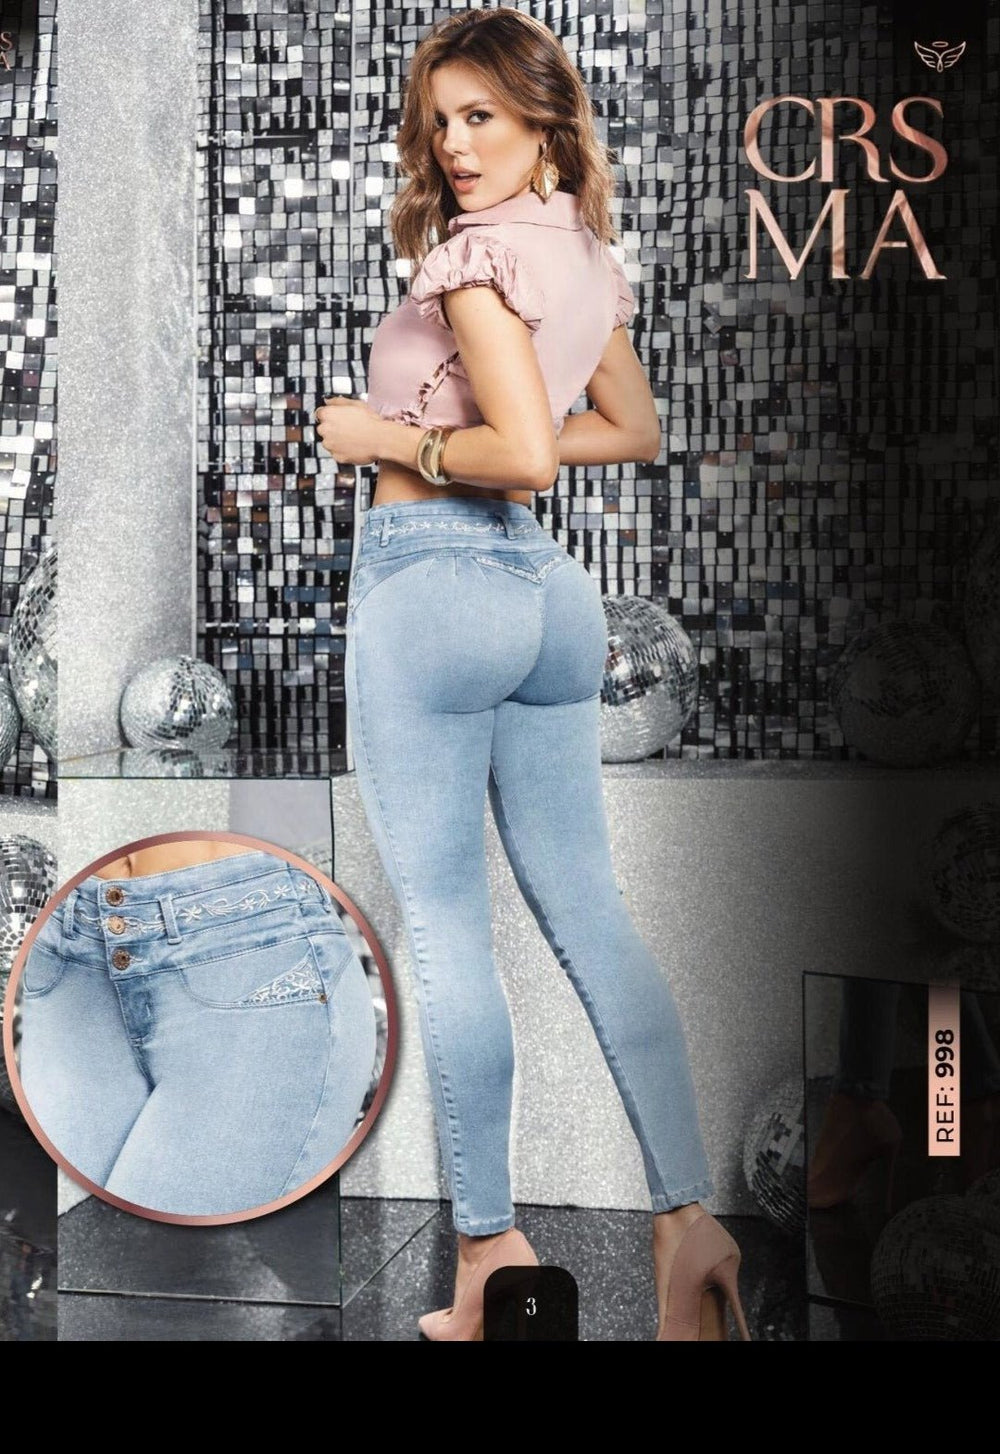 998 100% Authentic Colombian Push Up Jeans by Carisma Jeans** - JDColFashion